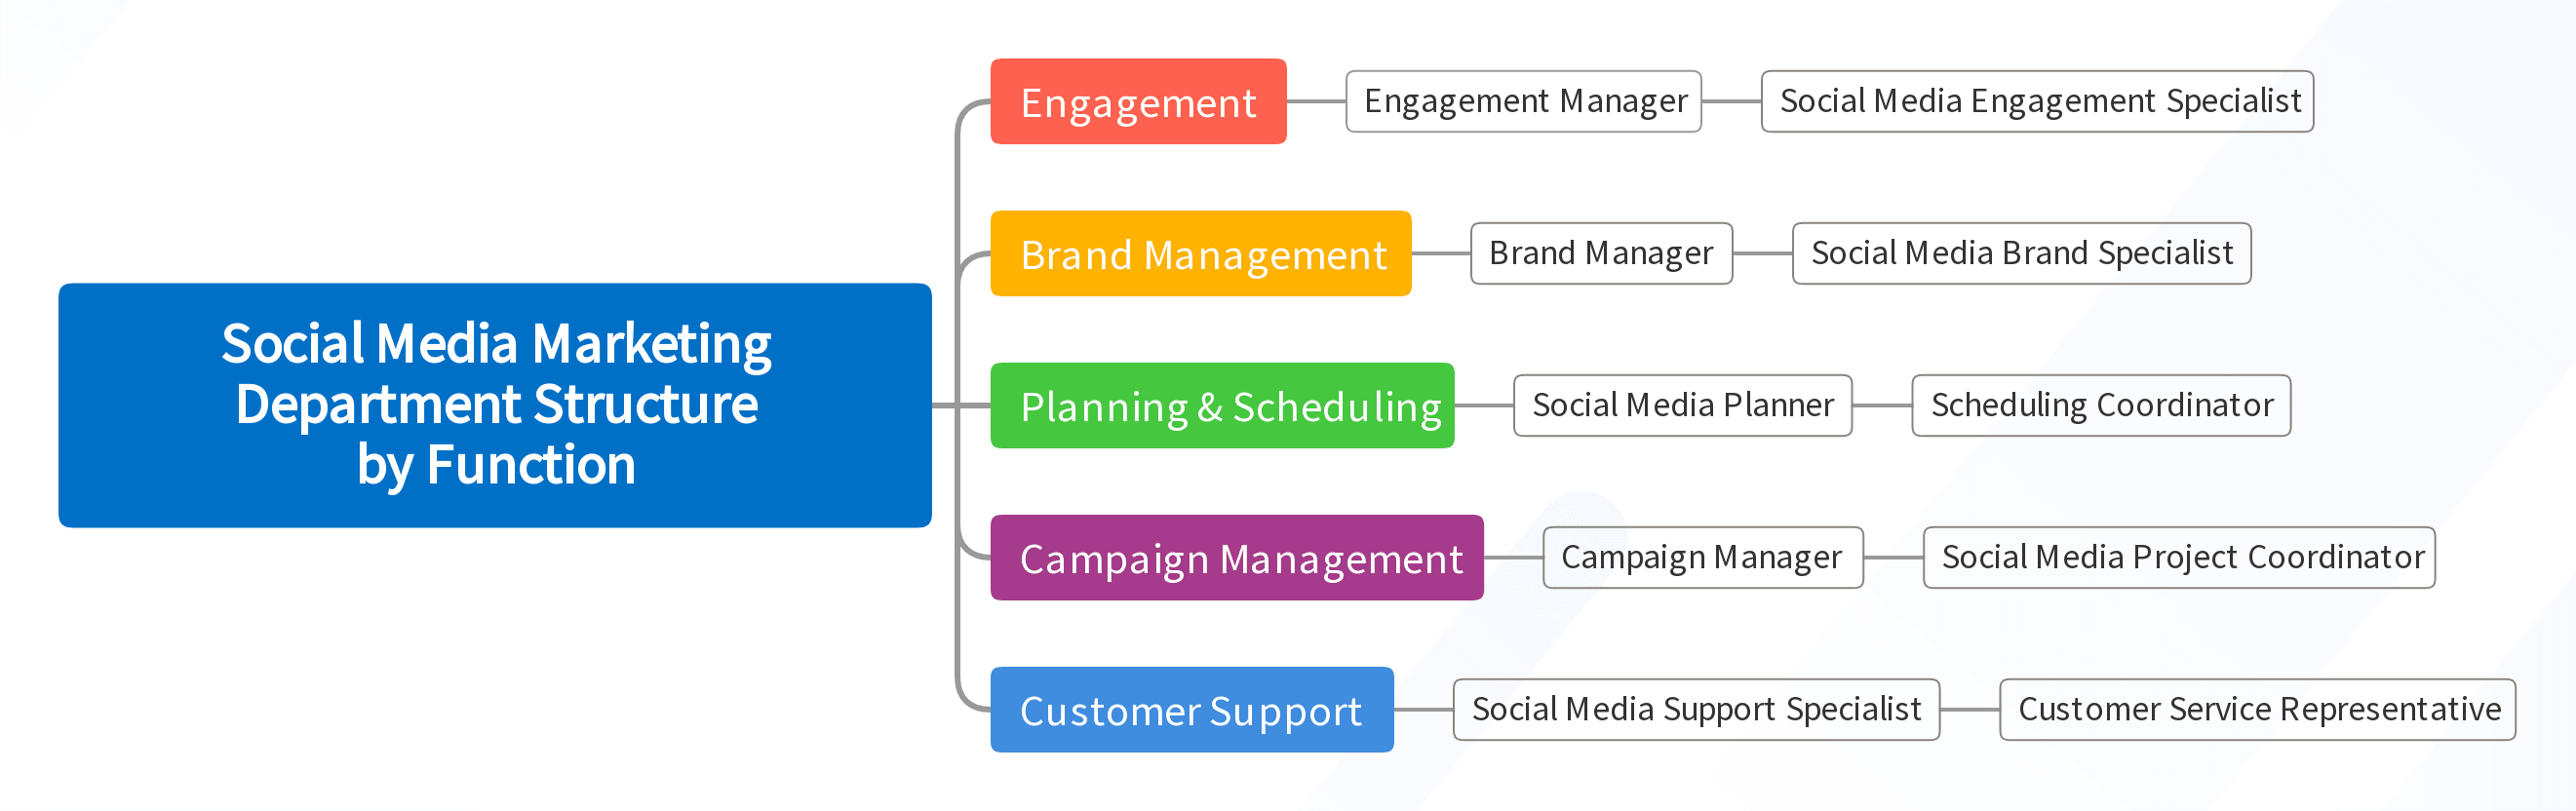 Social Media Marketing Department Structure by Function